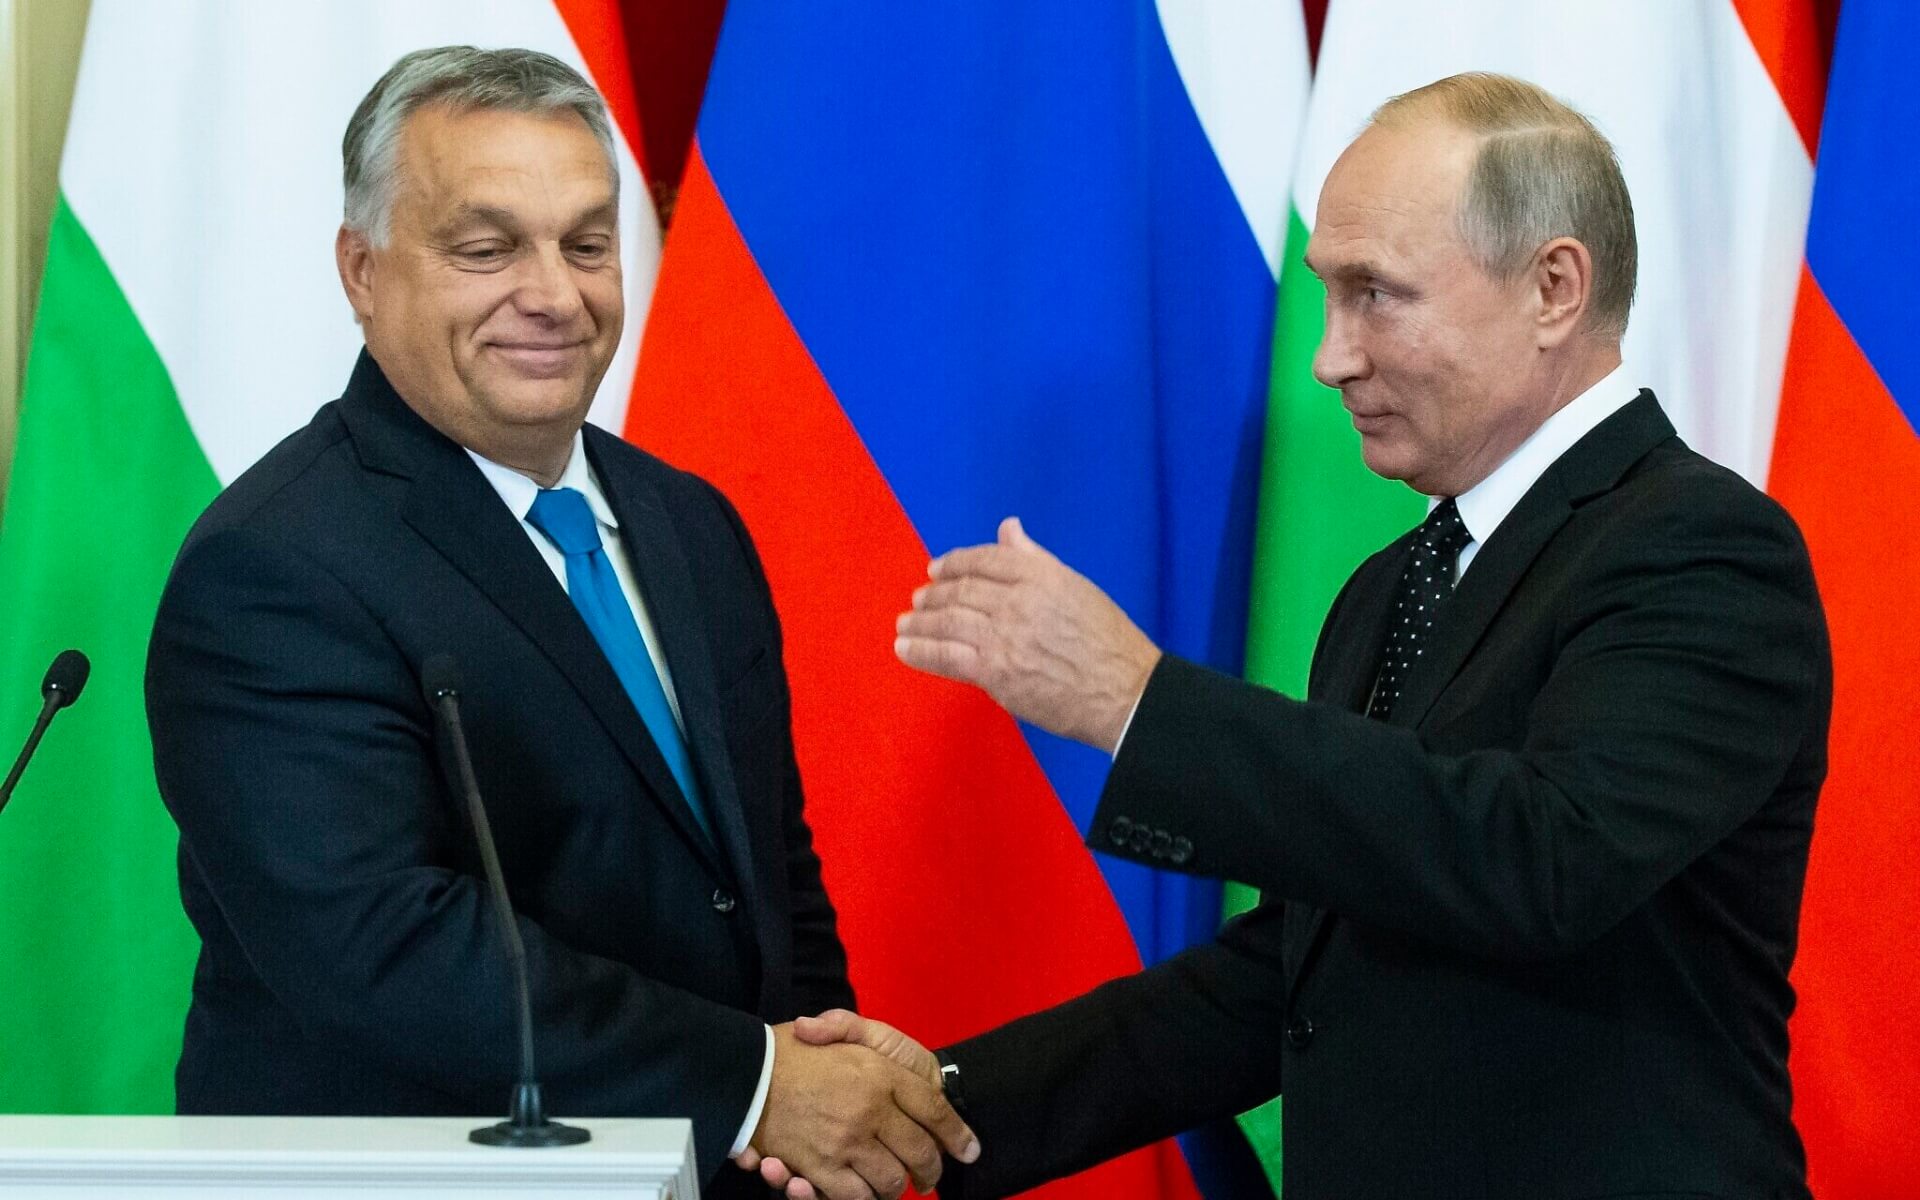 Hungary’s Orbán Agrees to Pay for Russian Gas in Rubles, Urges Putin to Impose Ceasefire